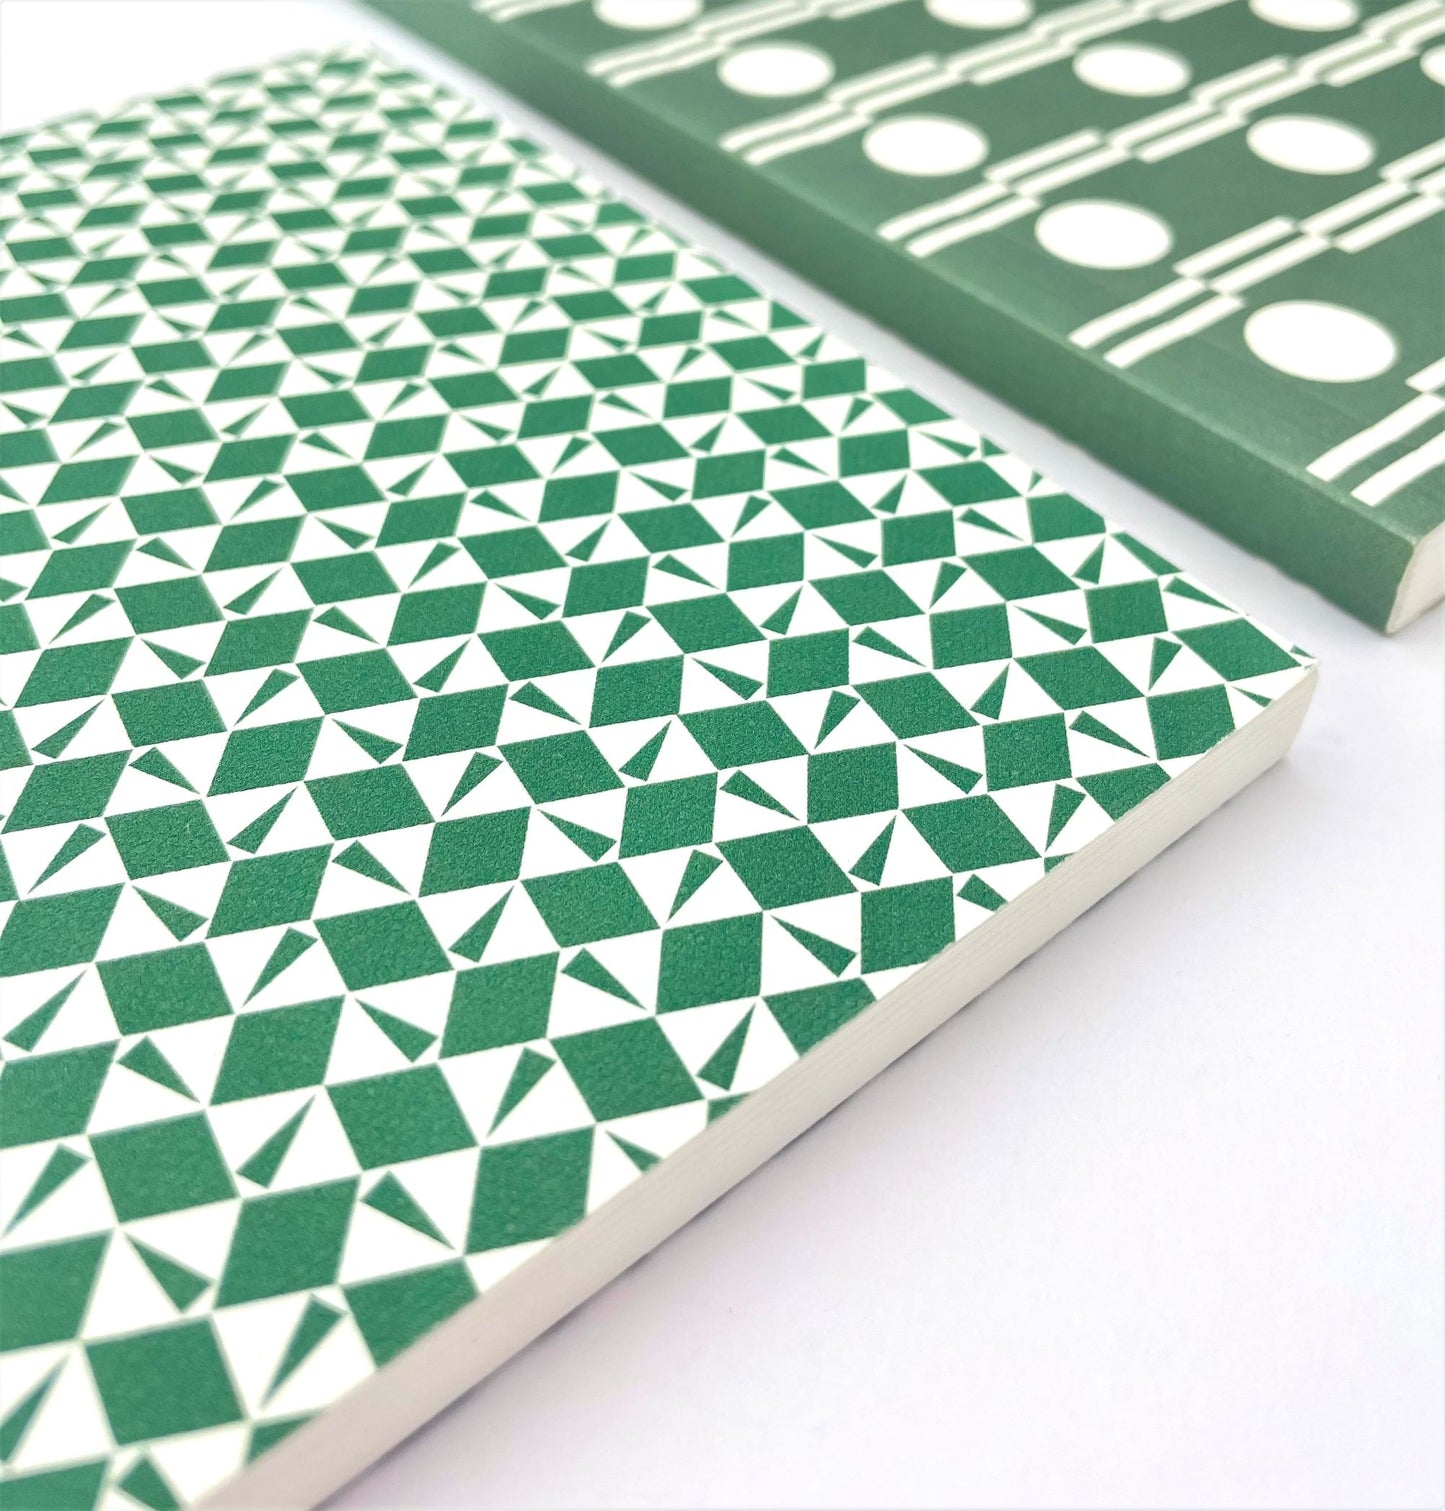 A5 softback notebook with geometric emerald green and white repeat diamond and triangles patterned cover. Dotted inner pages, close-up